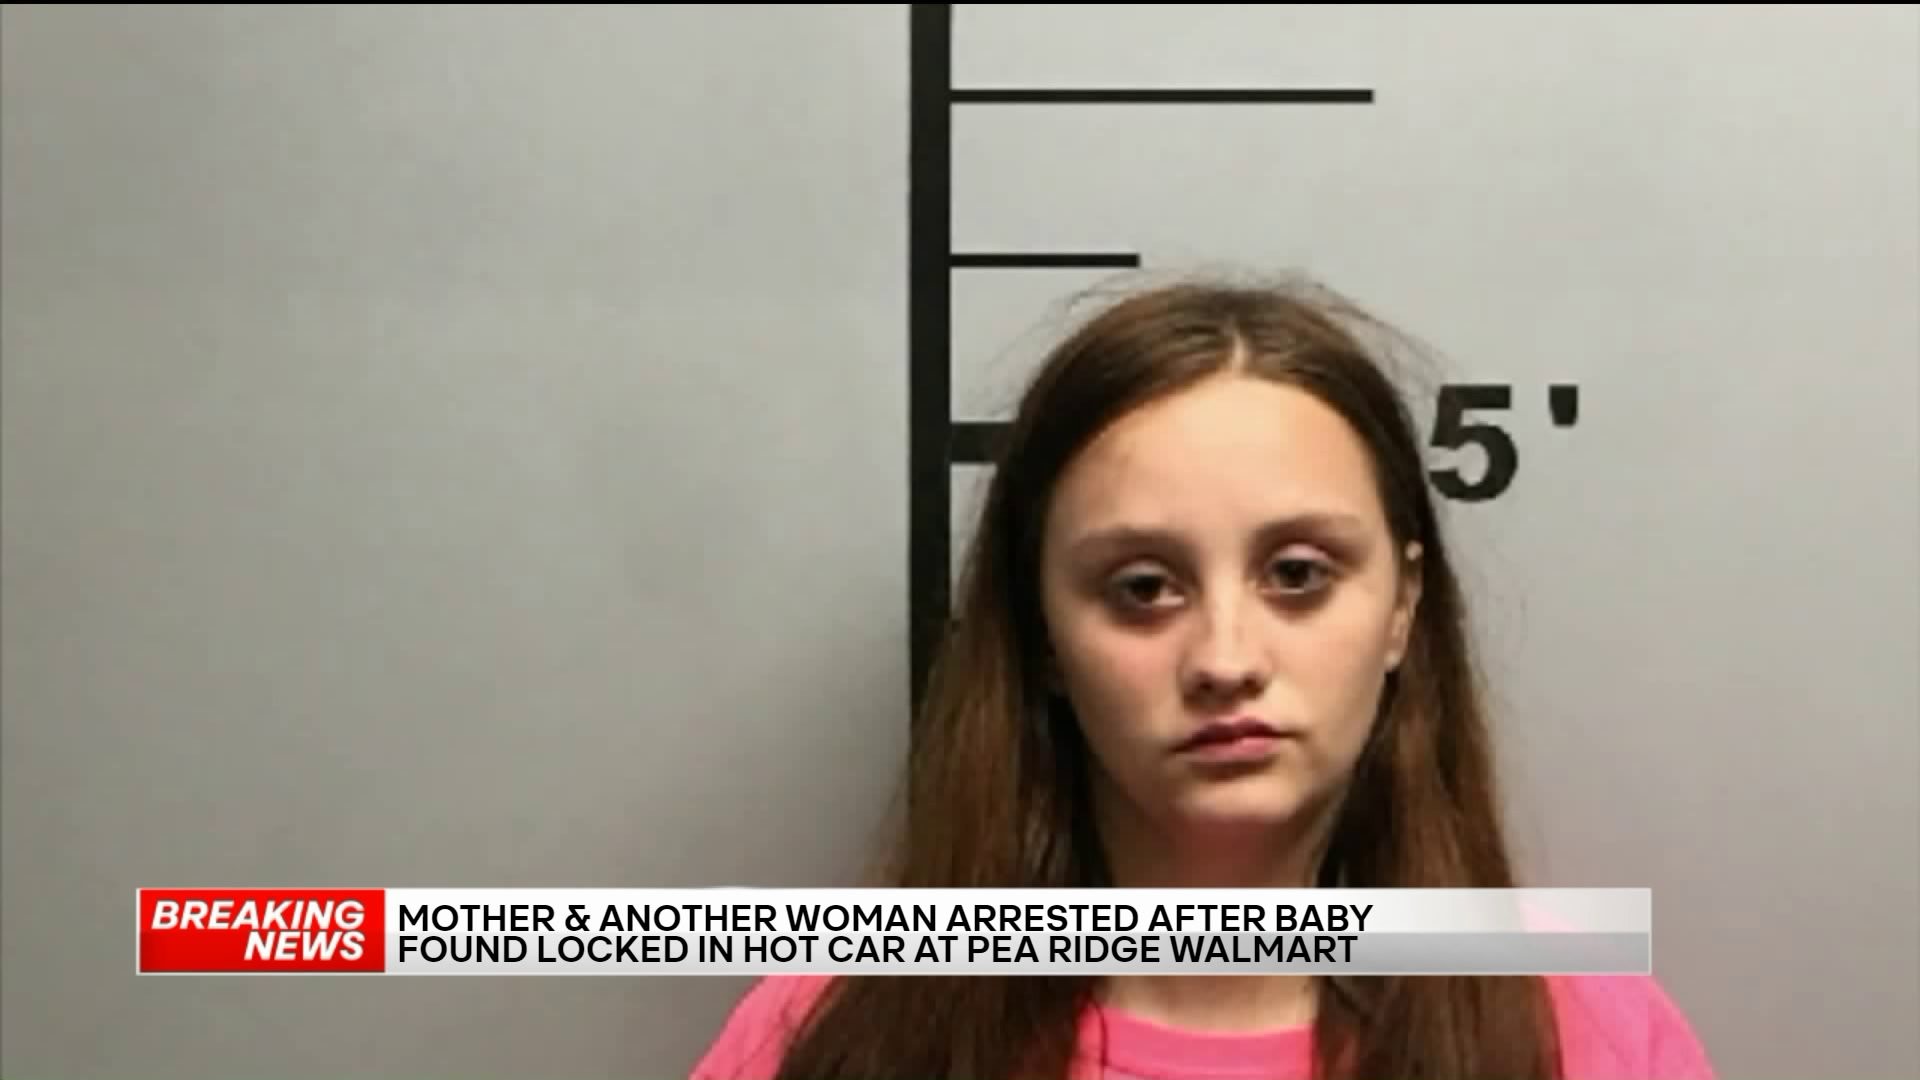 Mother Arrested For Leaving Infant In Hot Car At Pea Ridge Walmart, Bystanders Broke Window To Save Child